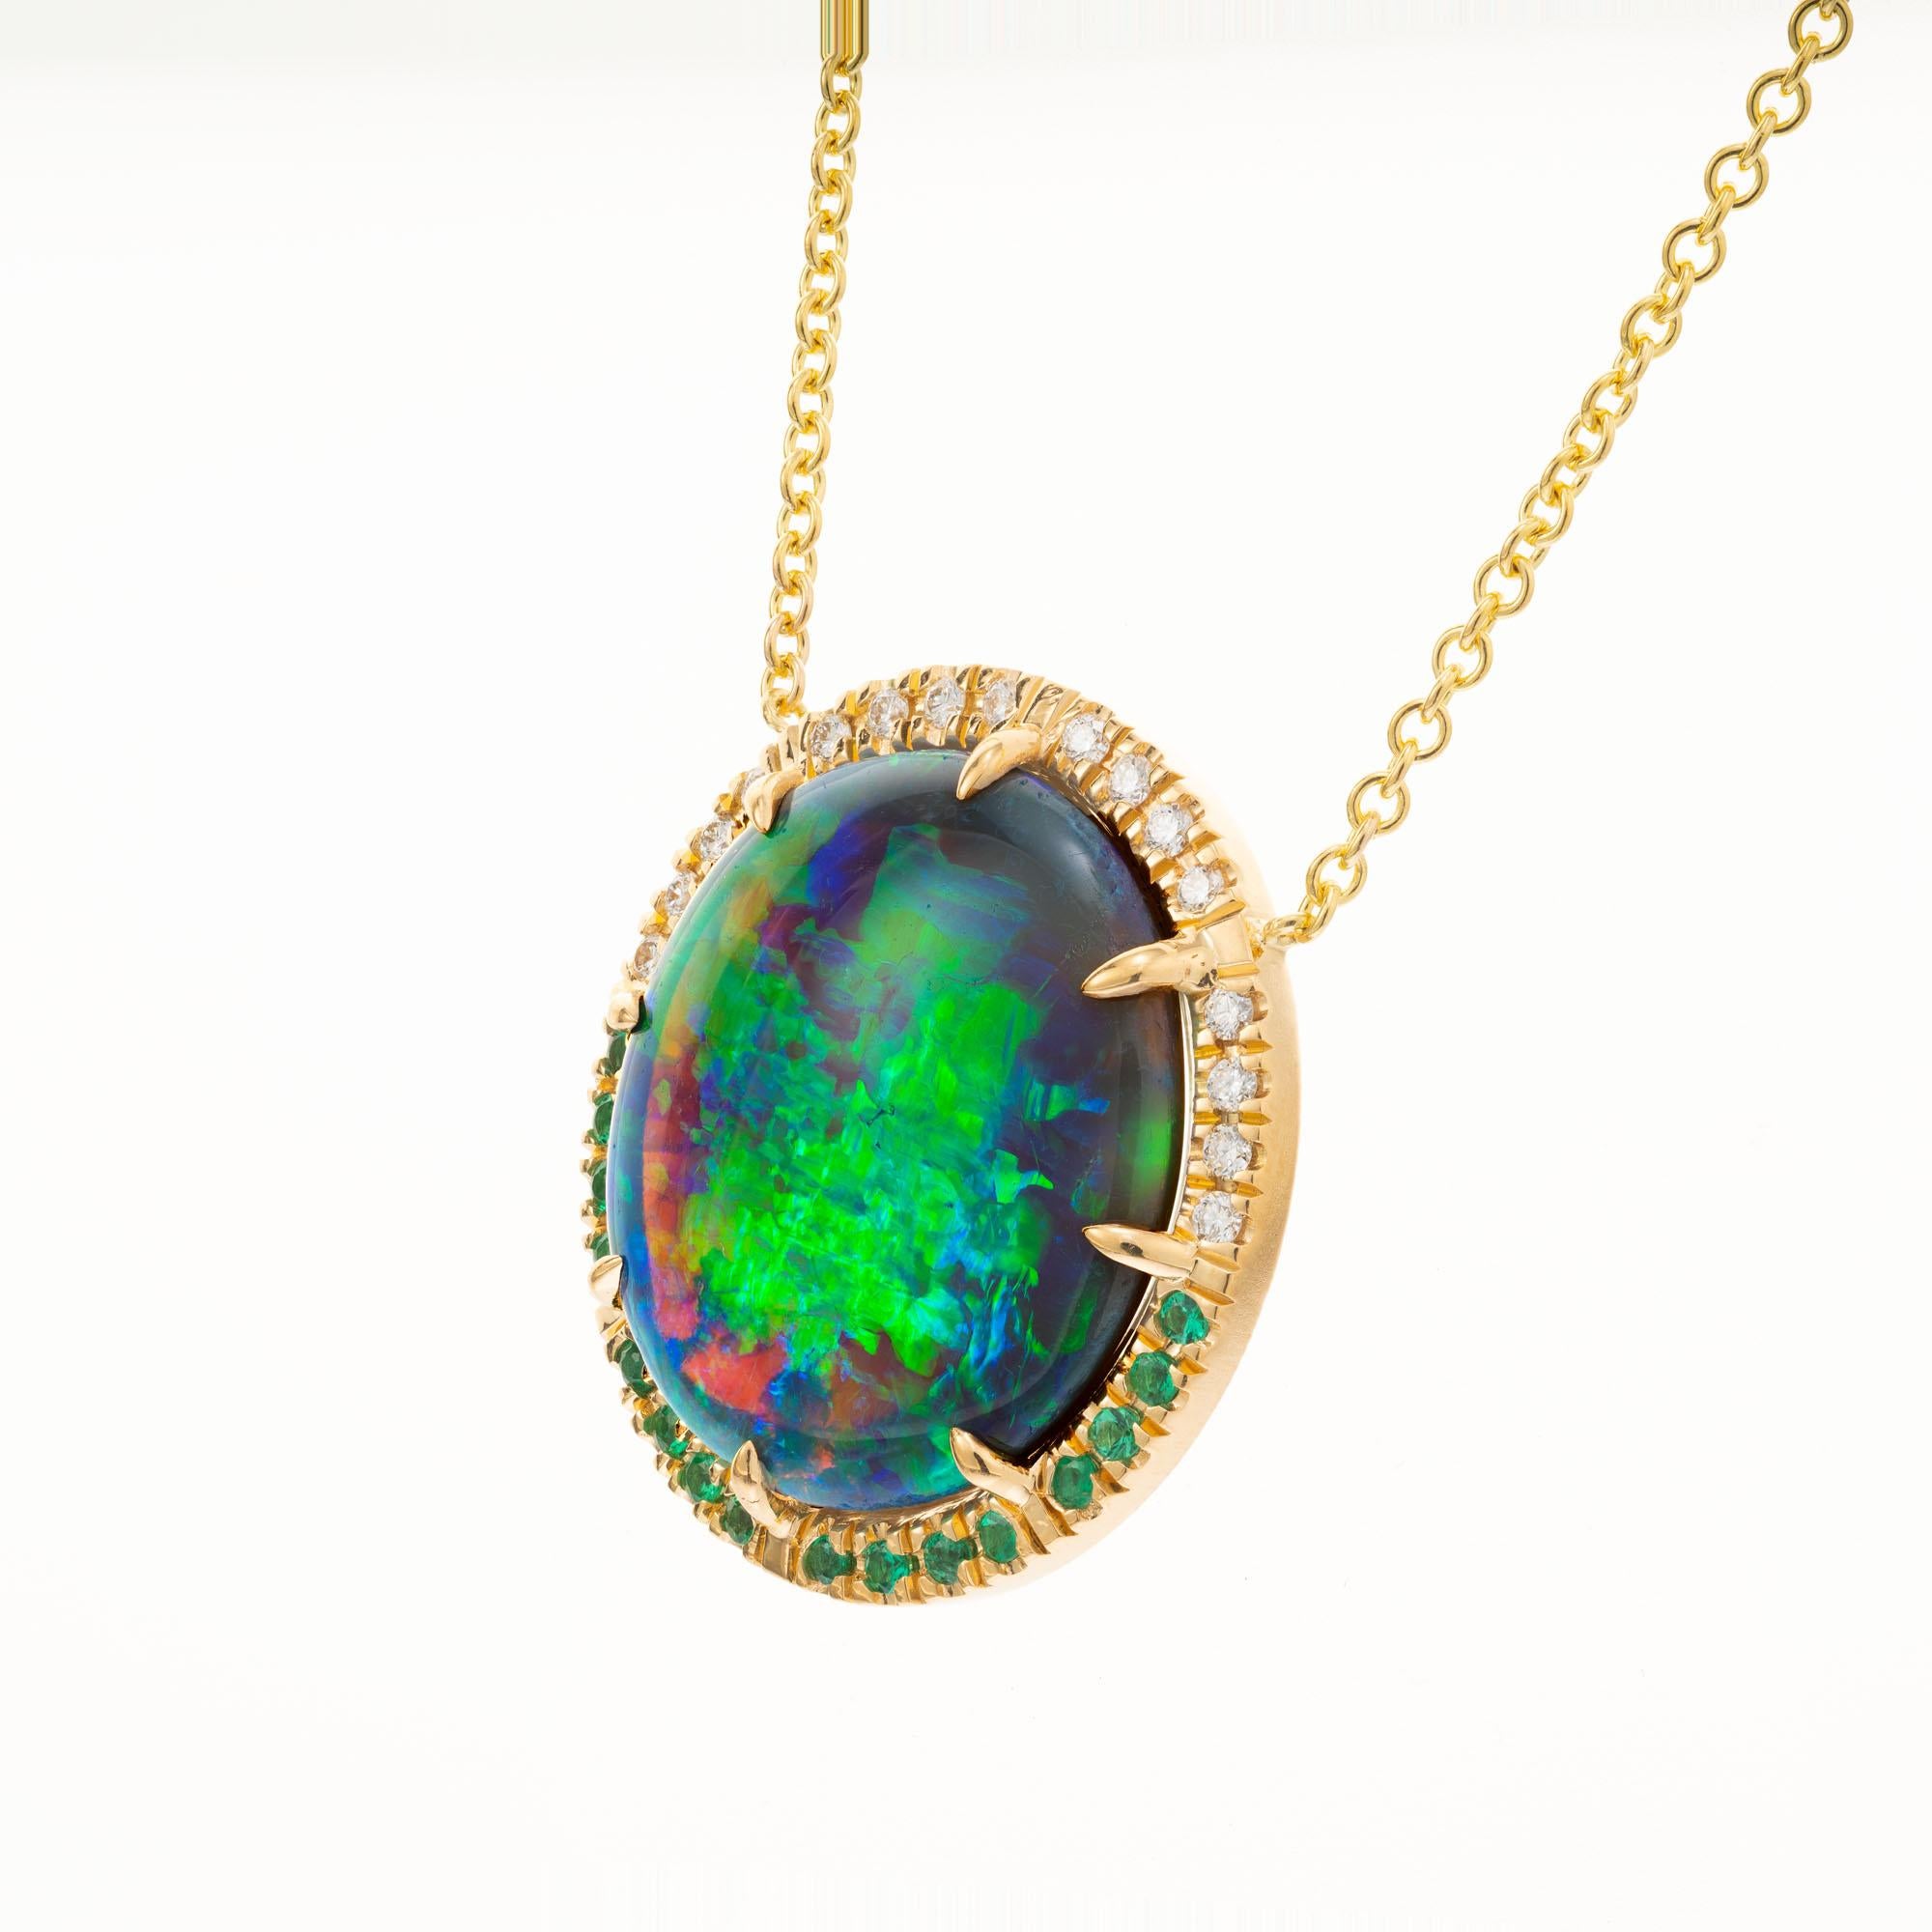 Opal and diamond pendant necklace. AGL certified natural 13.62cts. with a halo ofr white and green round diamonds. Opal has a broad flash pattern of yellow, green and blue. Natural and no enhancements.  20 inch yellow gold chain. Crafted in the